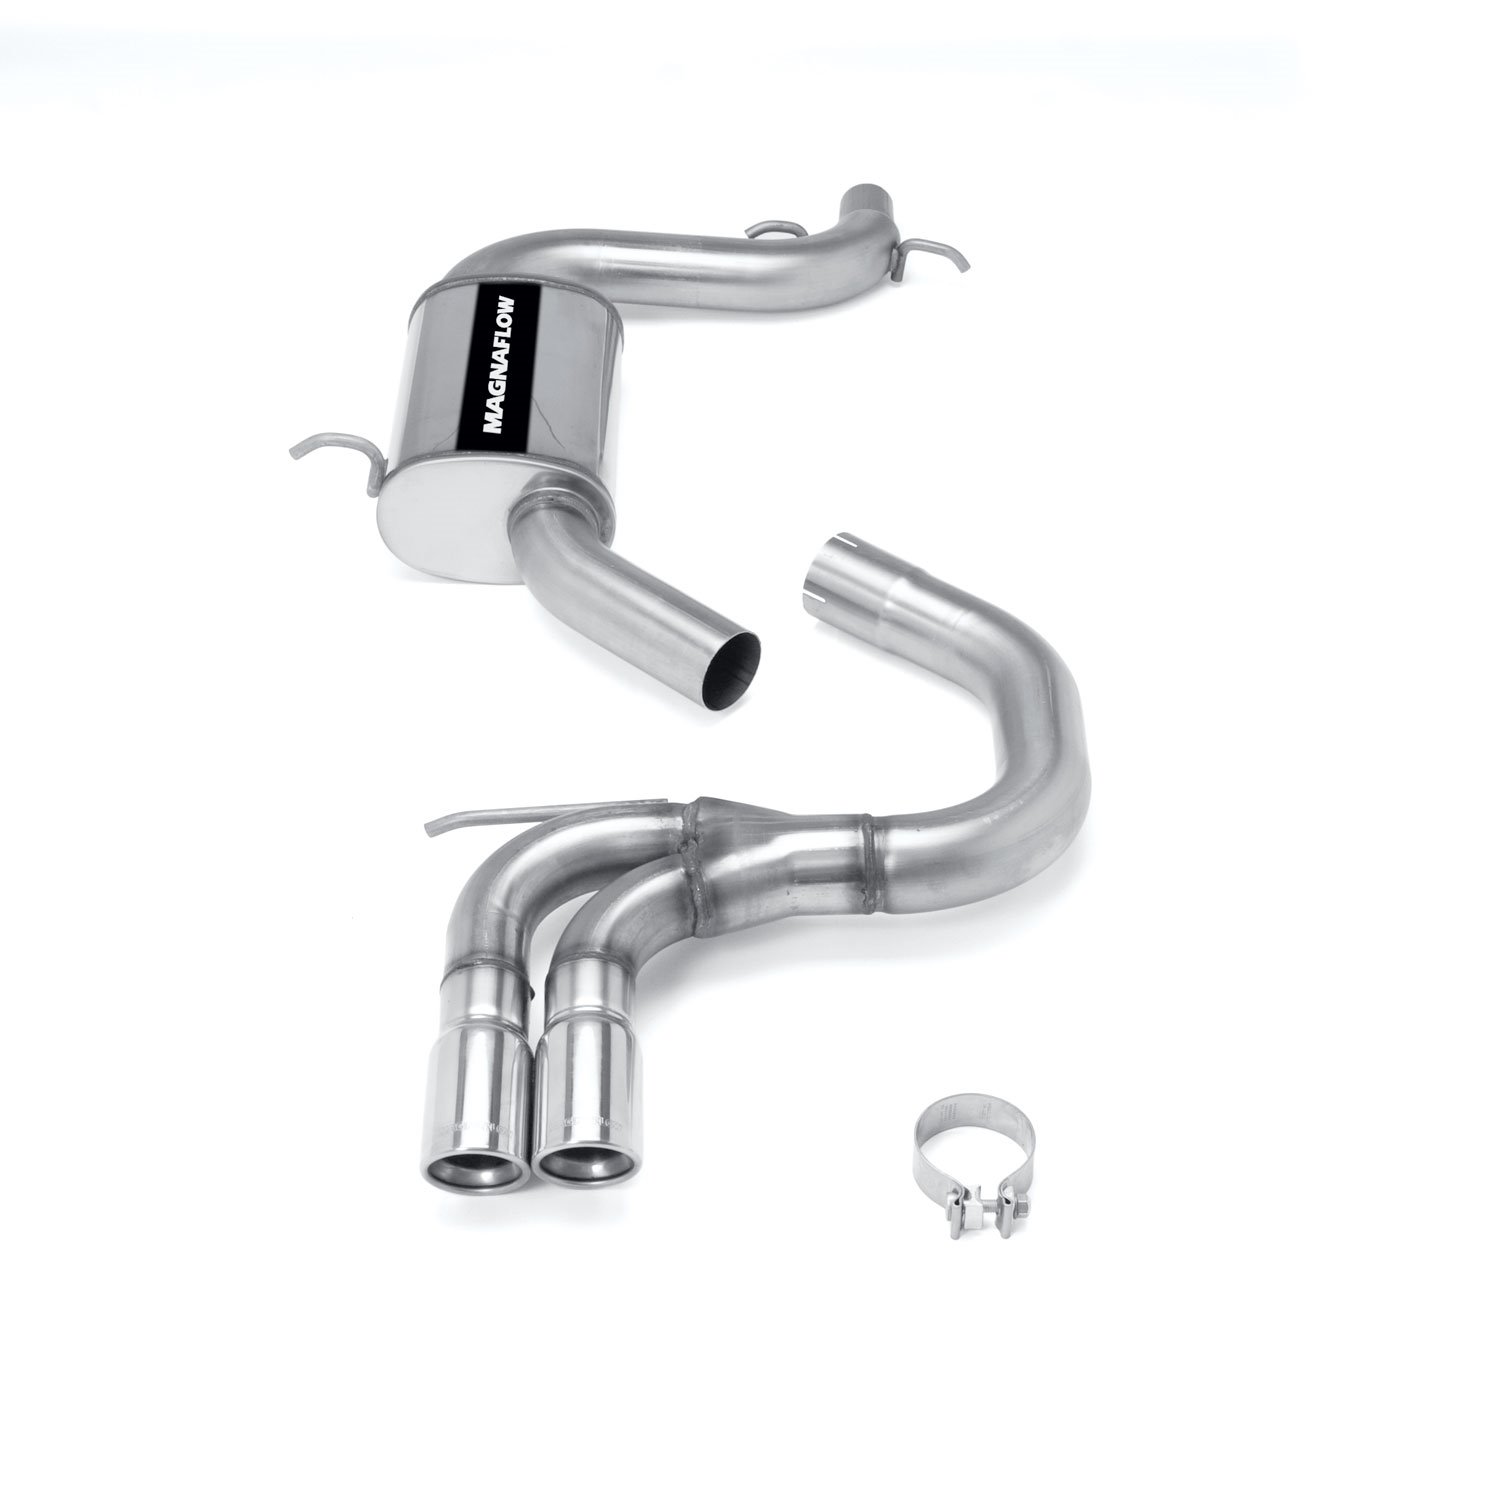 Touring Series Cat-Back Exhaust System 2006-09 VW GTI 2.0L L4